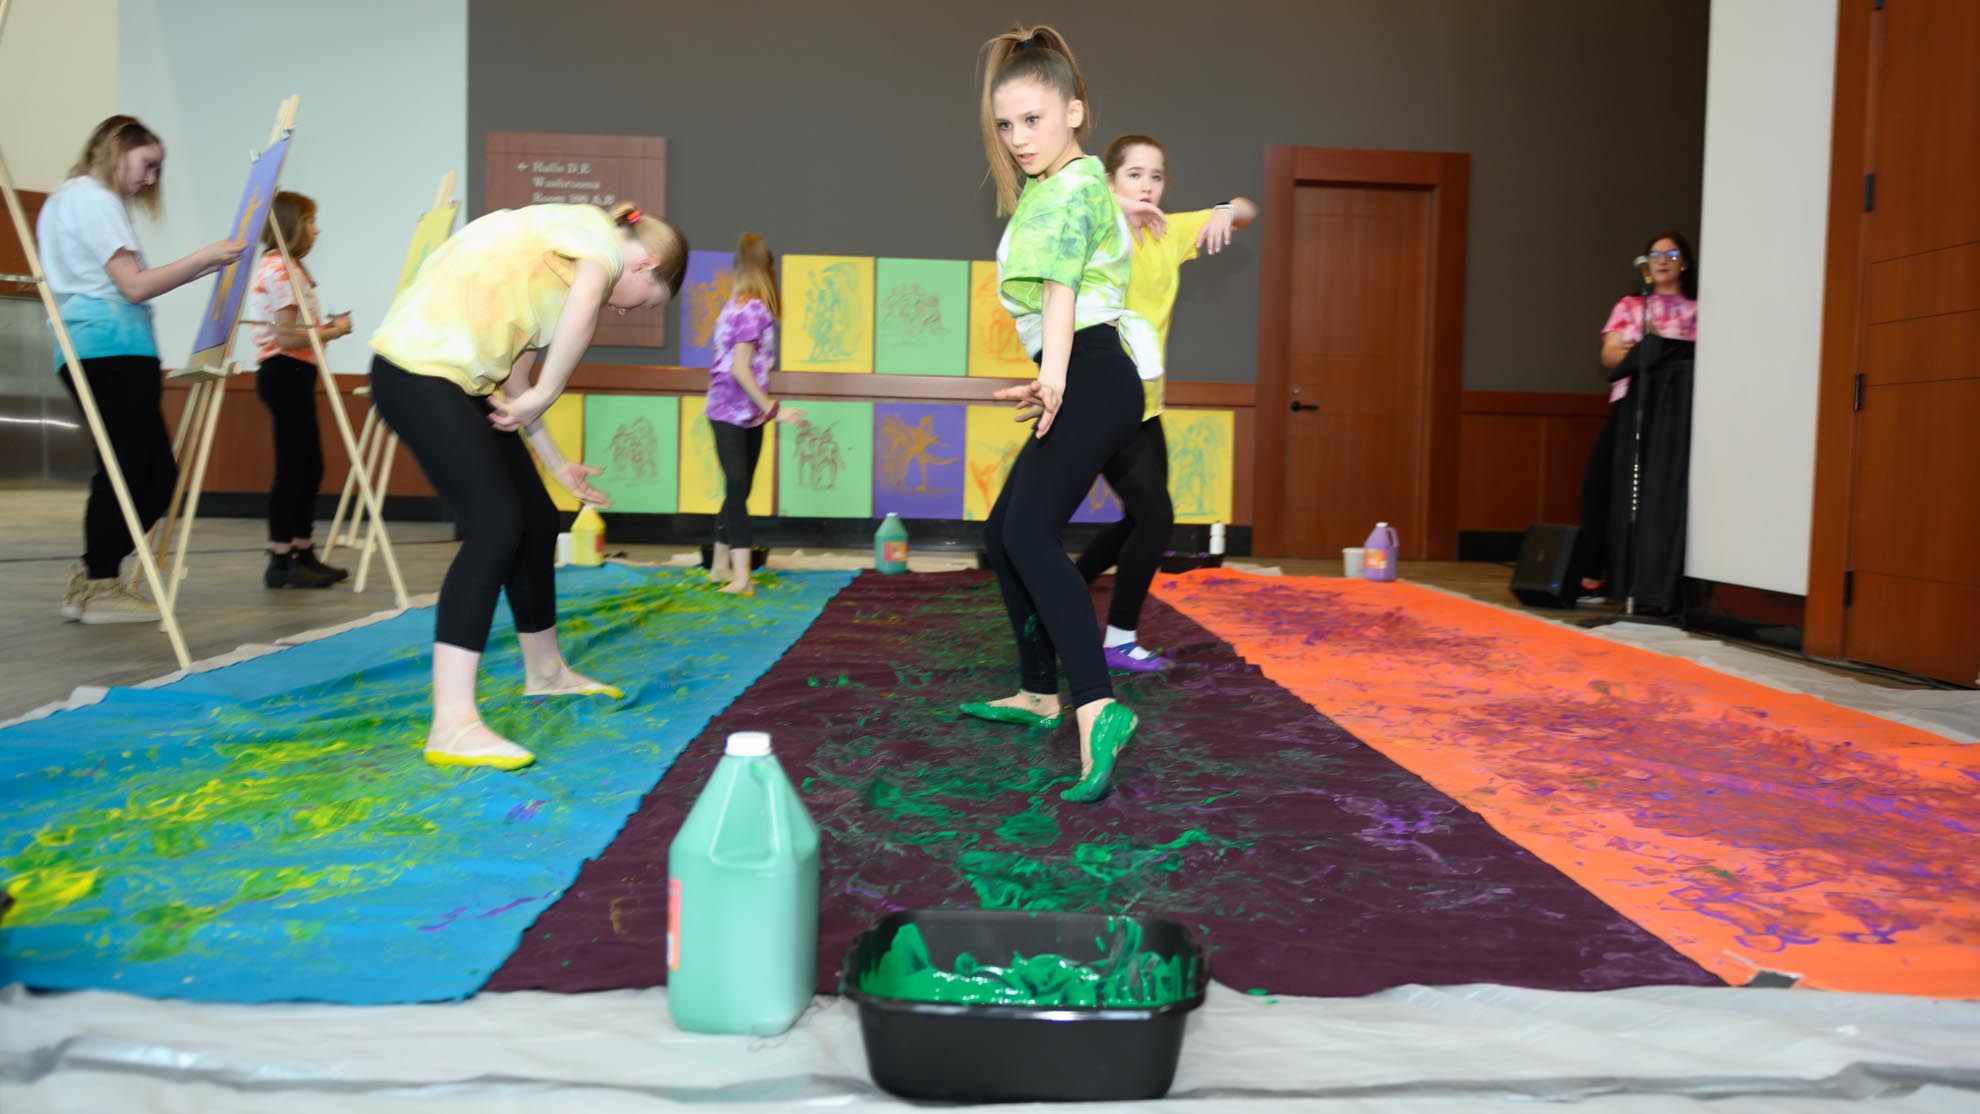 Students from Willow Park Arts Centred Learning School create an art/movement installation